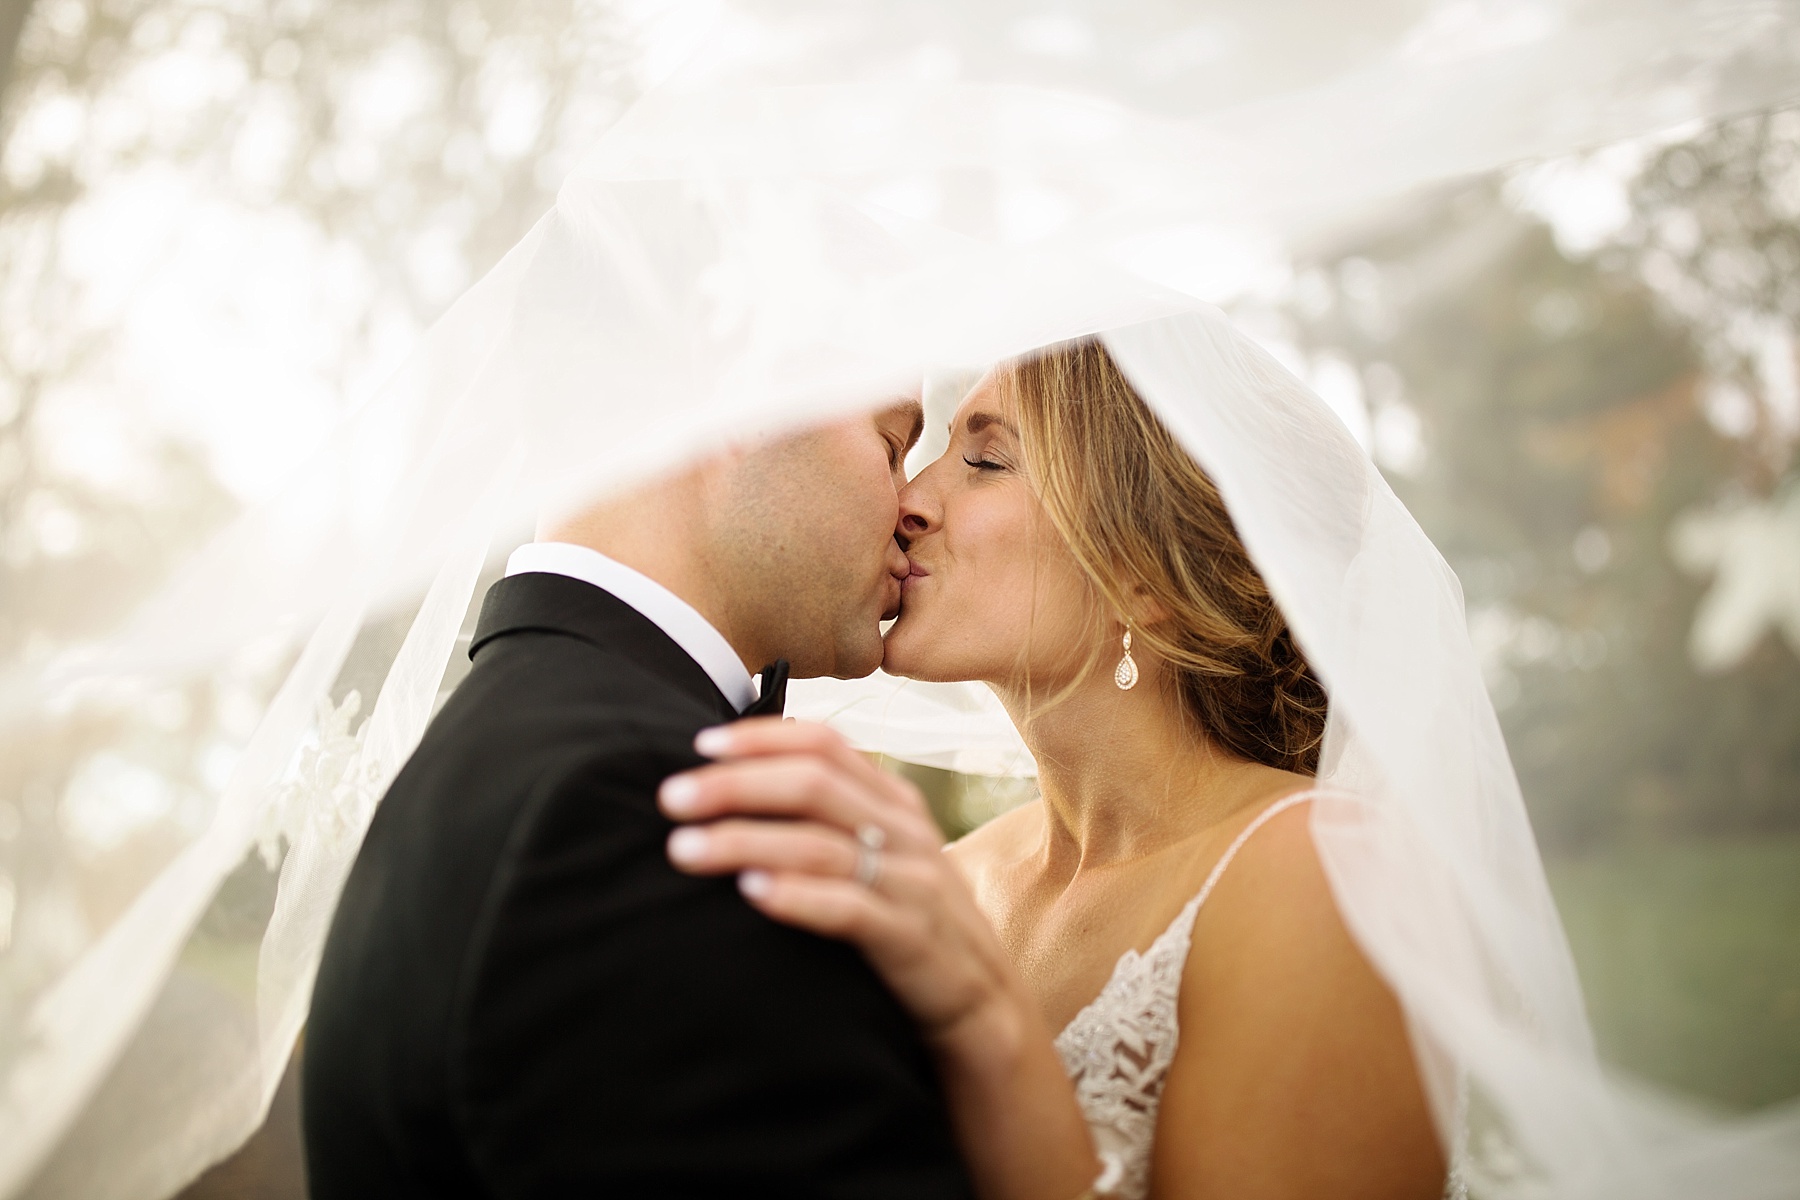 HOW TO CREATE THOSE SUPER ROMANTIC “UNDER THE VEIL” PORTRAITS